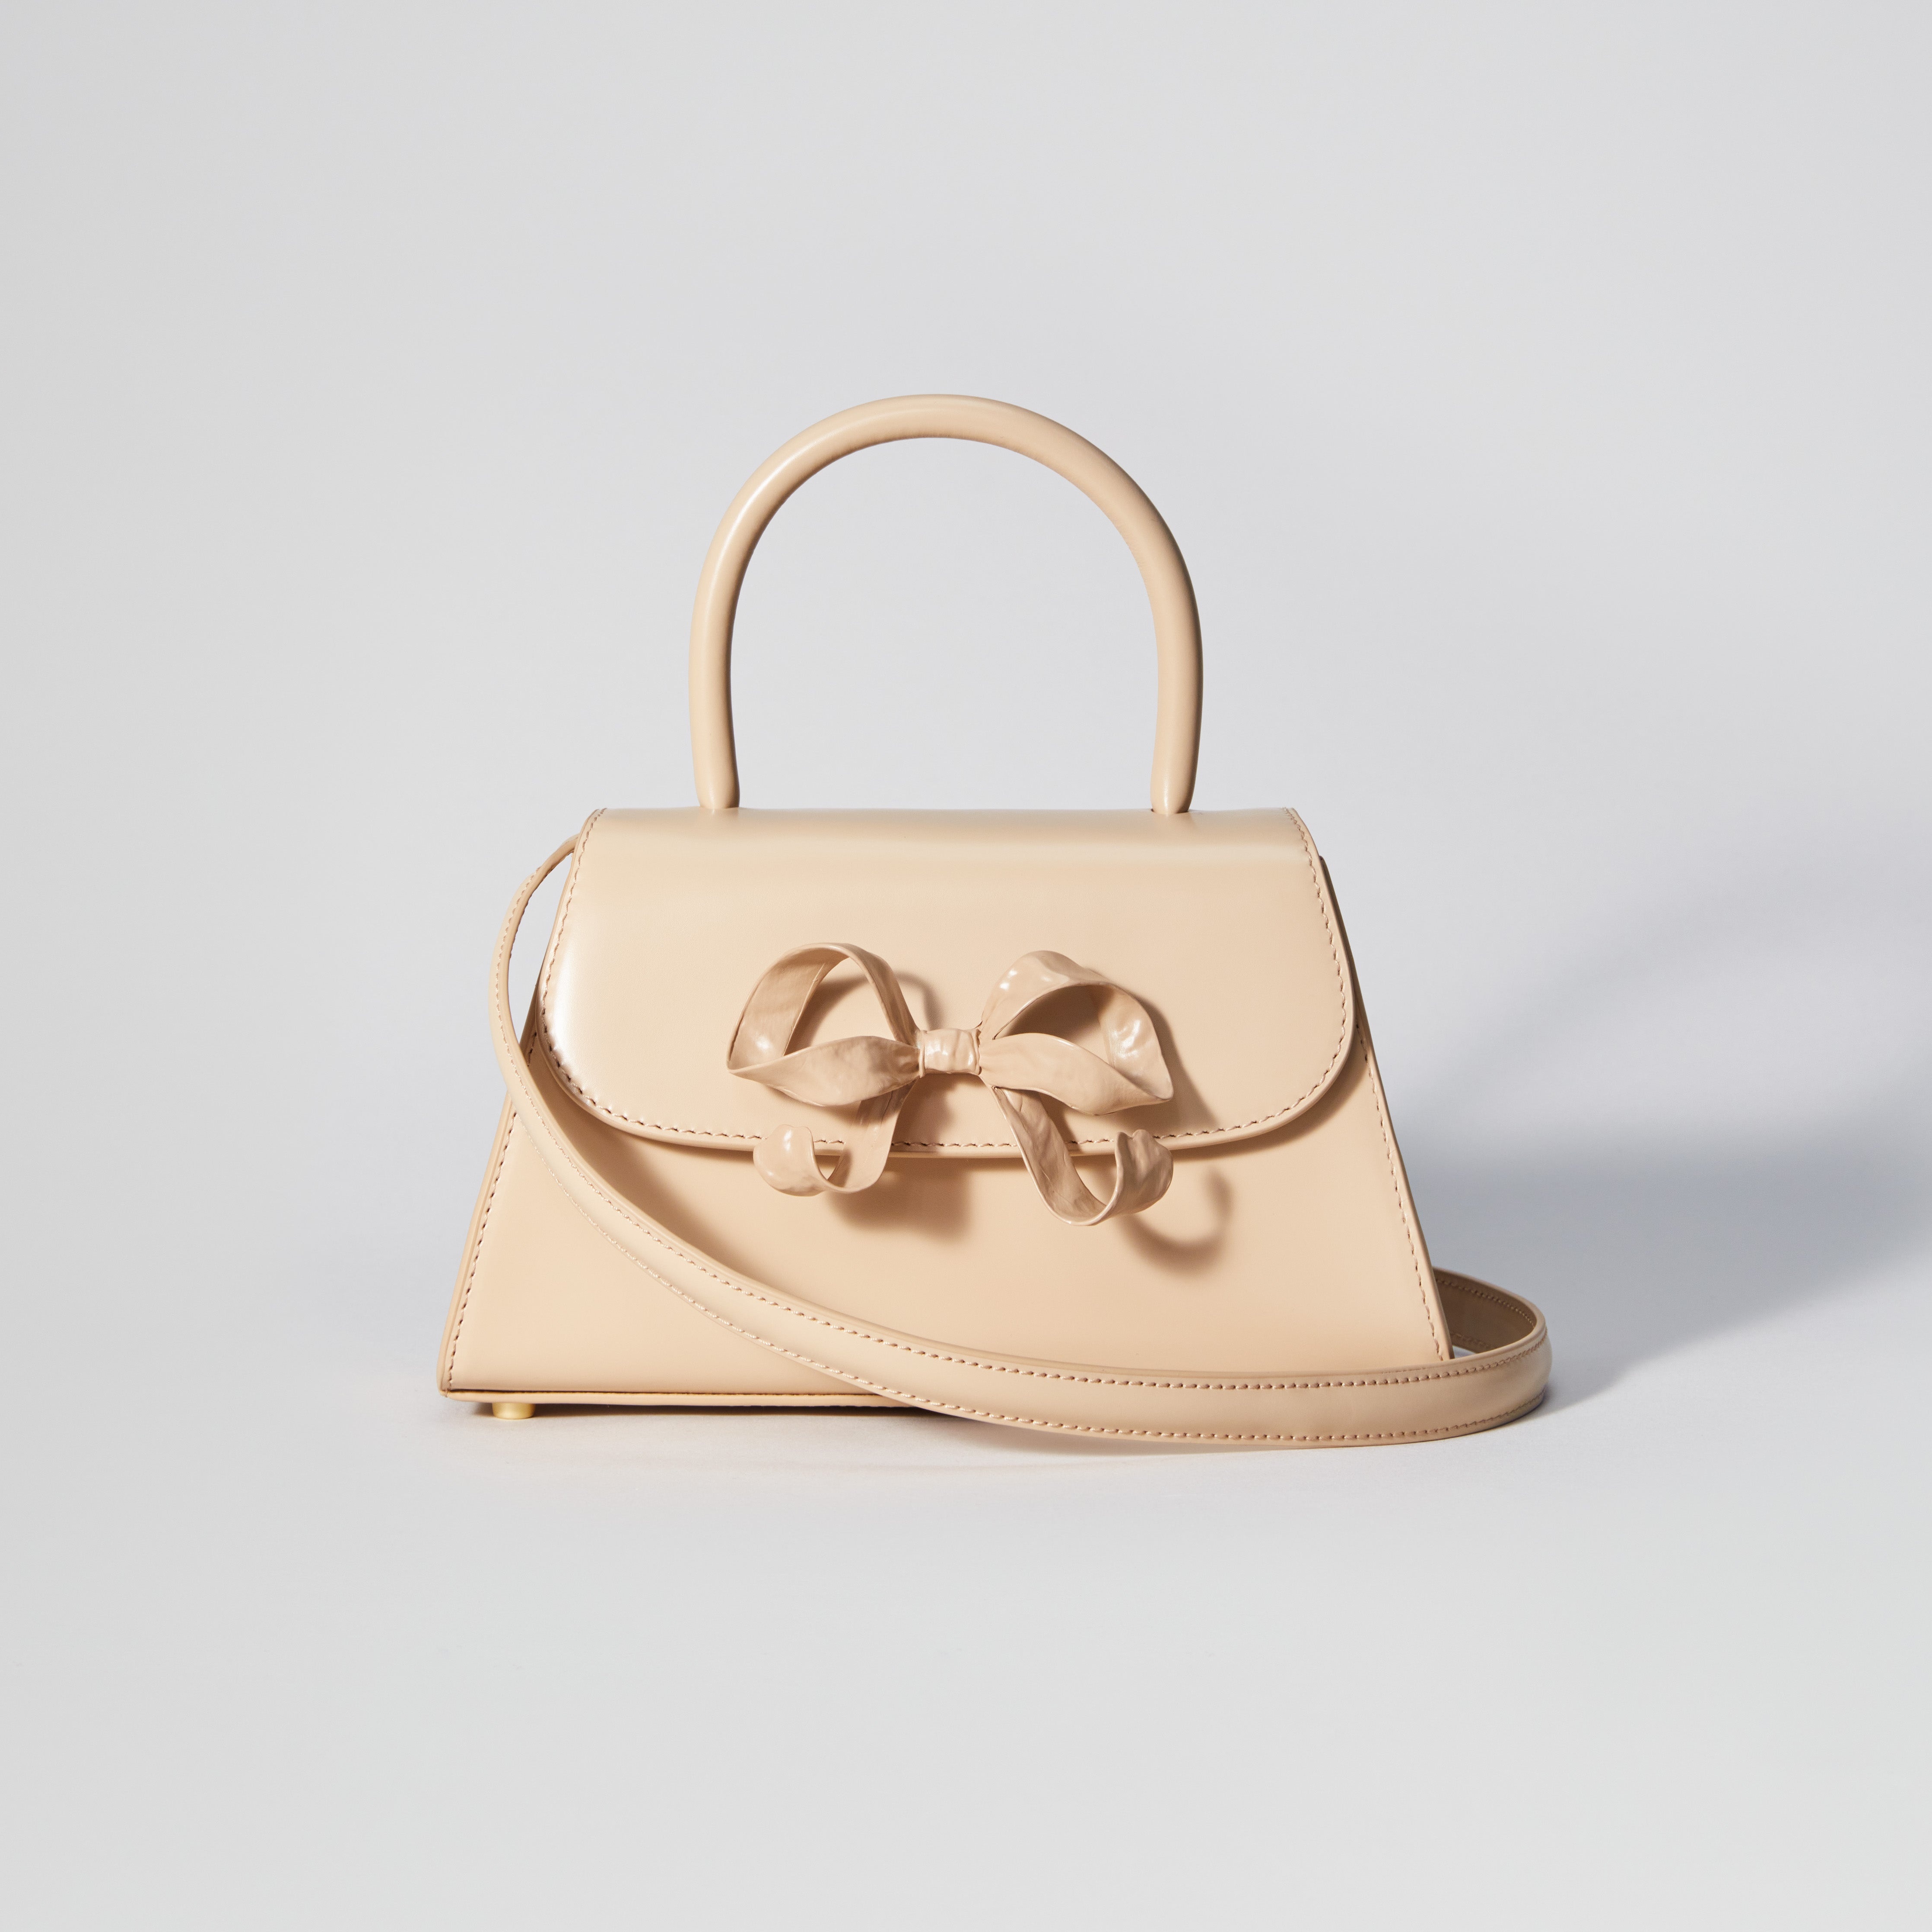 The Bow Mini in Beige with Enamel - 4